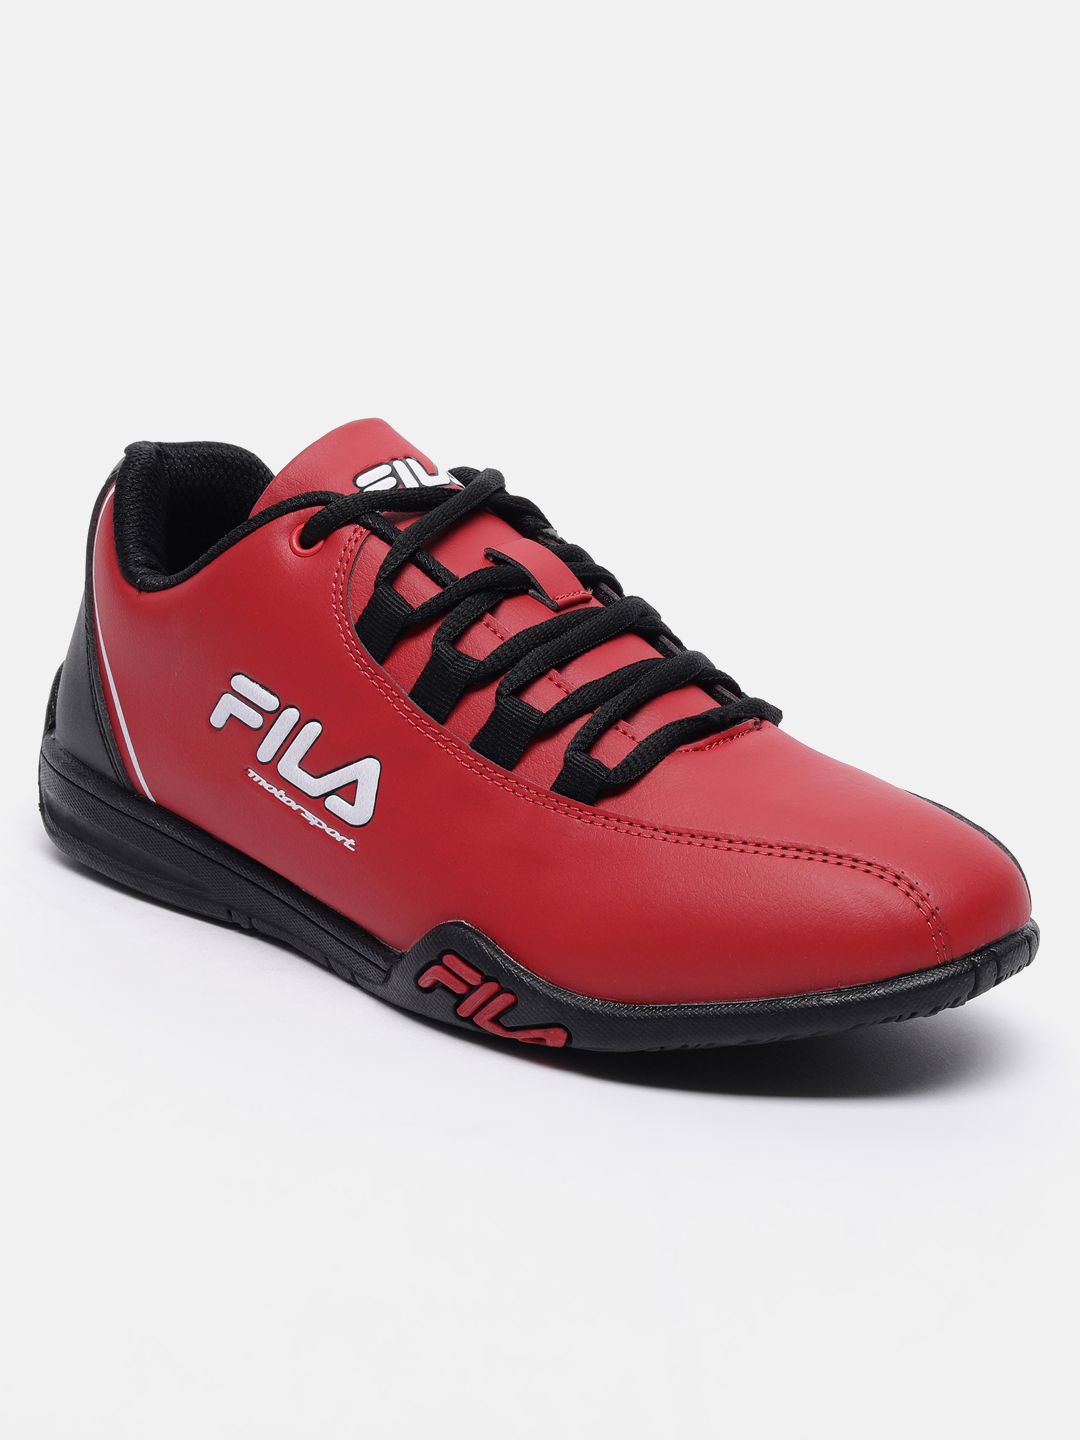 FILA RAY TRACER TR_100] FILA Shoes Women Men Shoes for Women Sneakers for  Women Shoes Sneakers FILA | Shopee Philippines